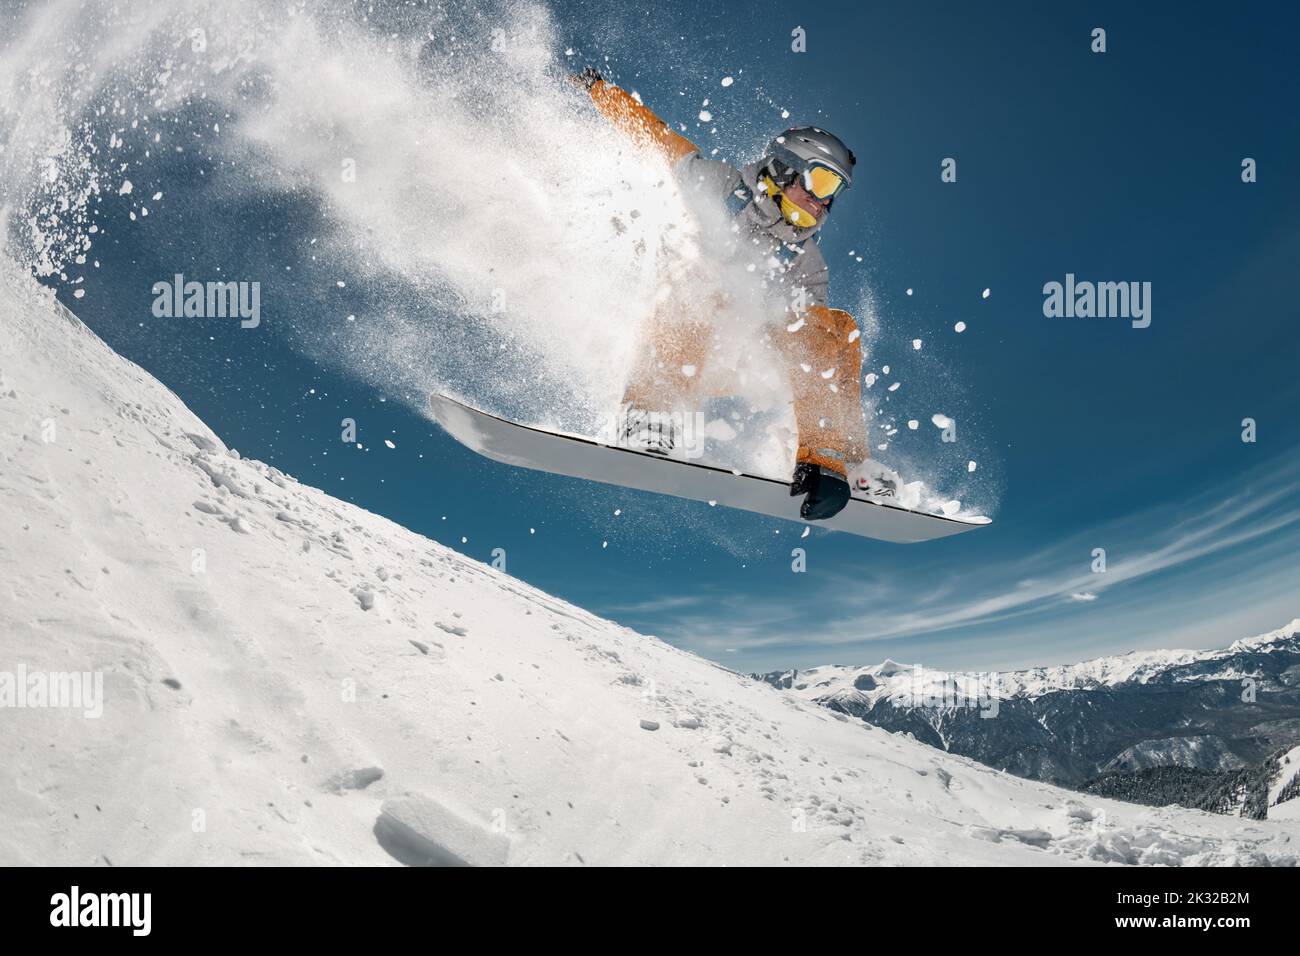 Professional snowboarder jump at off-piste ski slope. Extreme sports concept Stock Photo